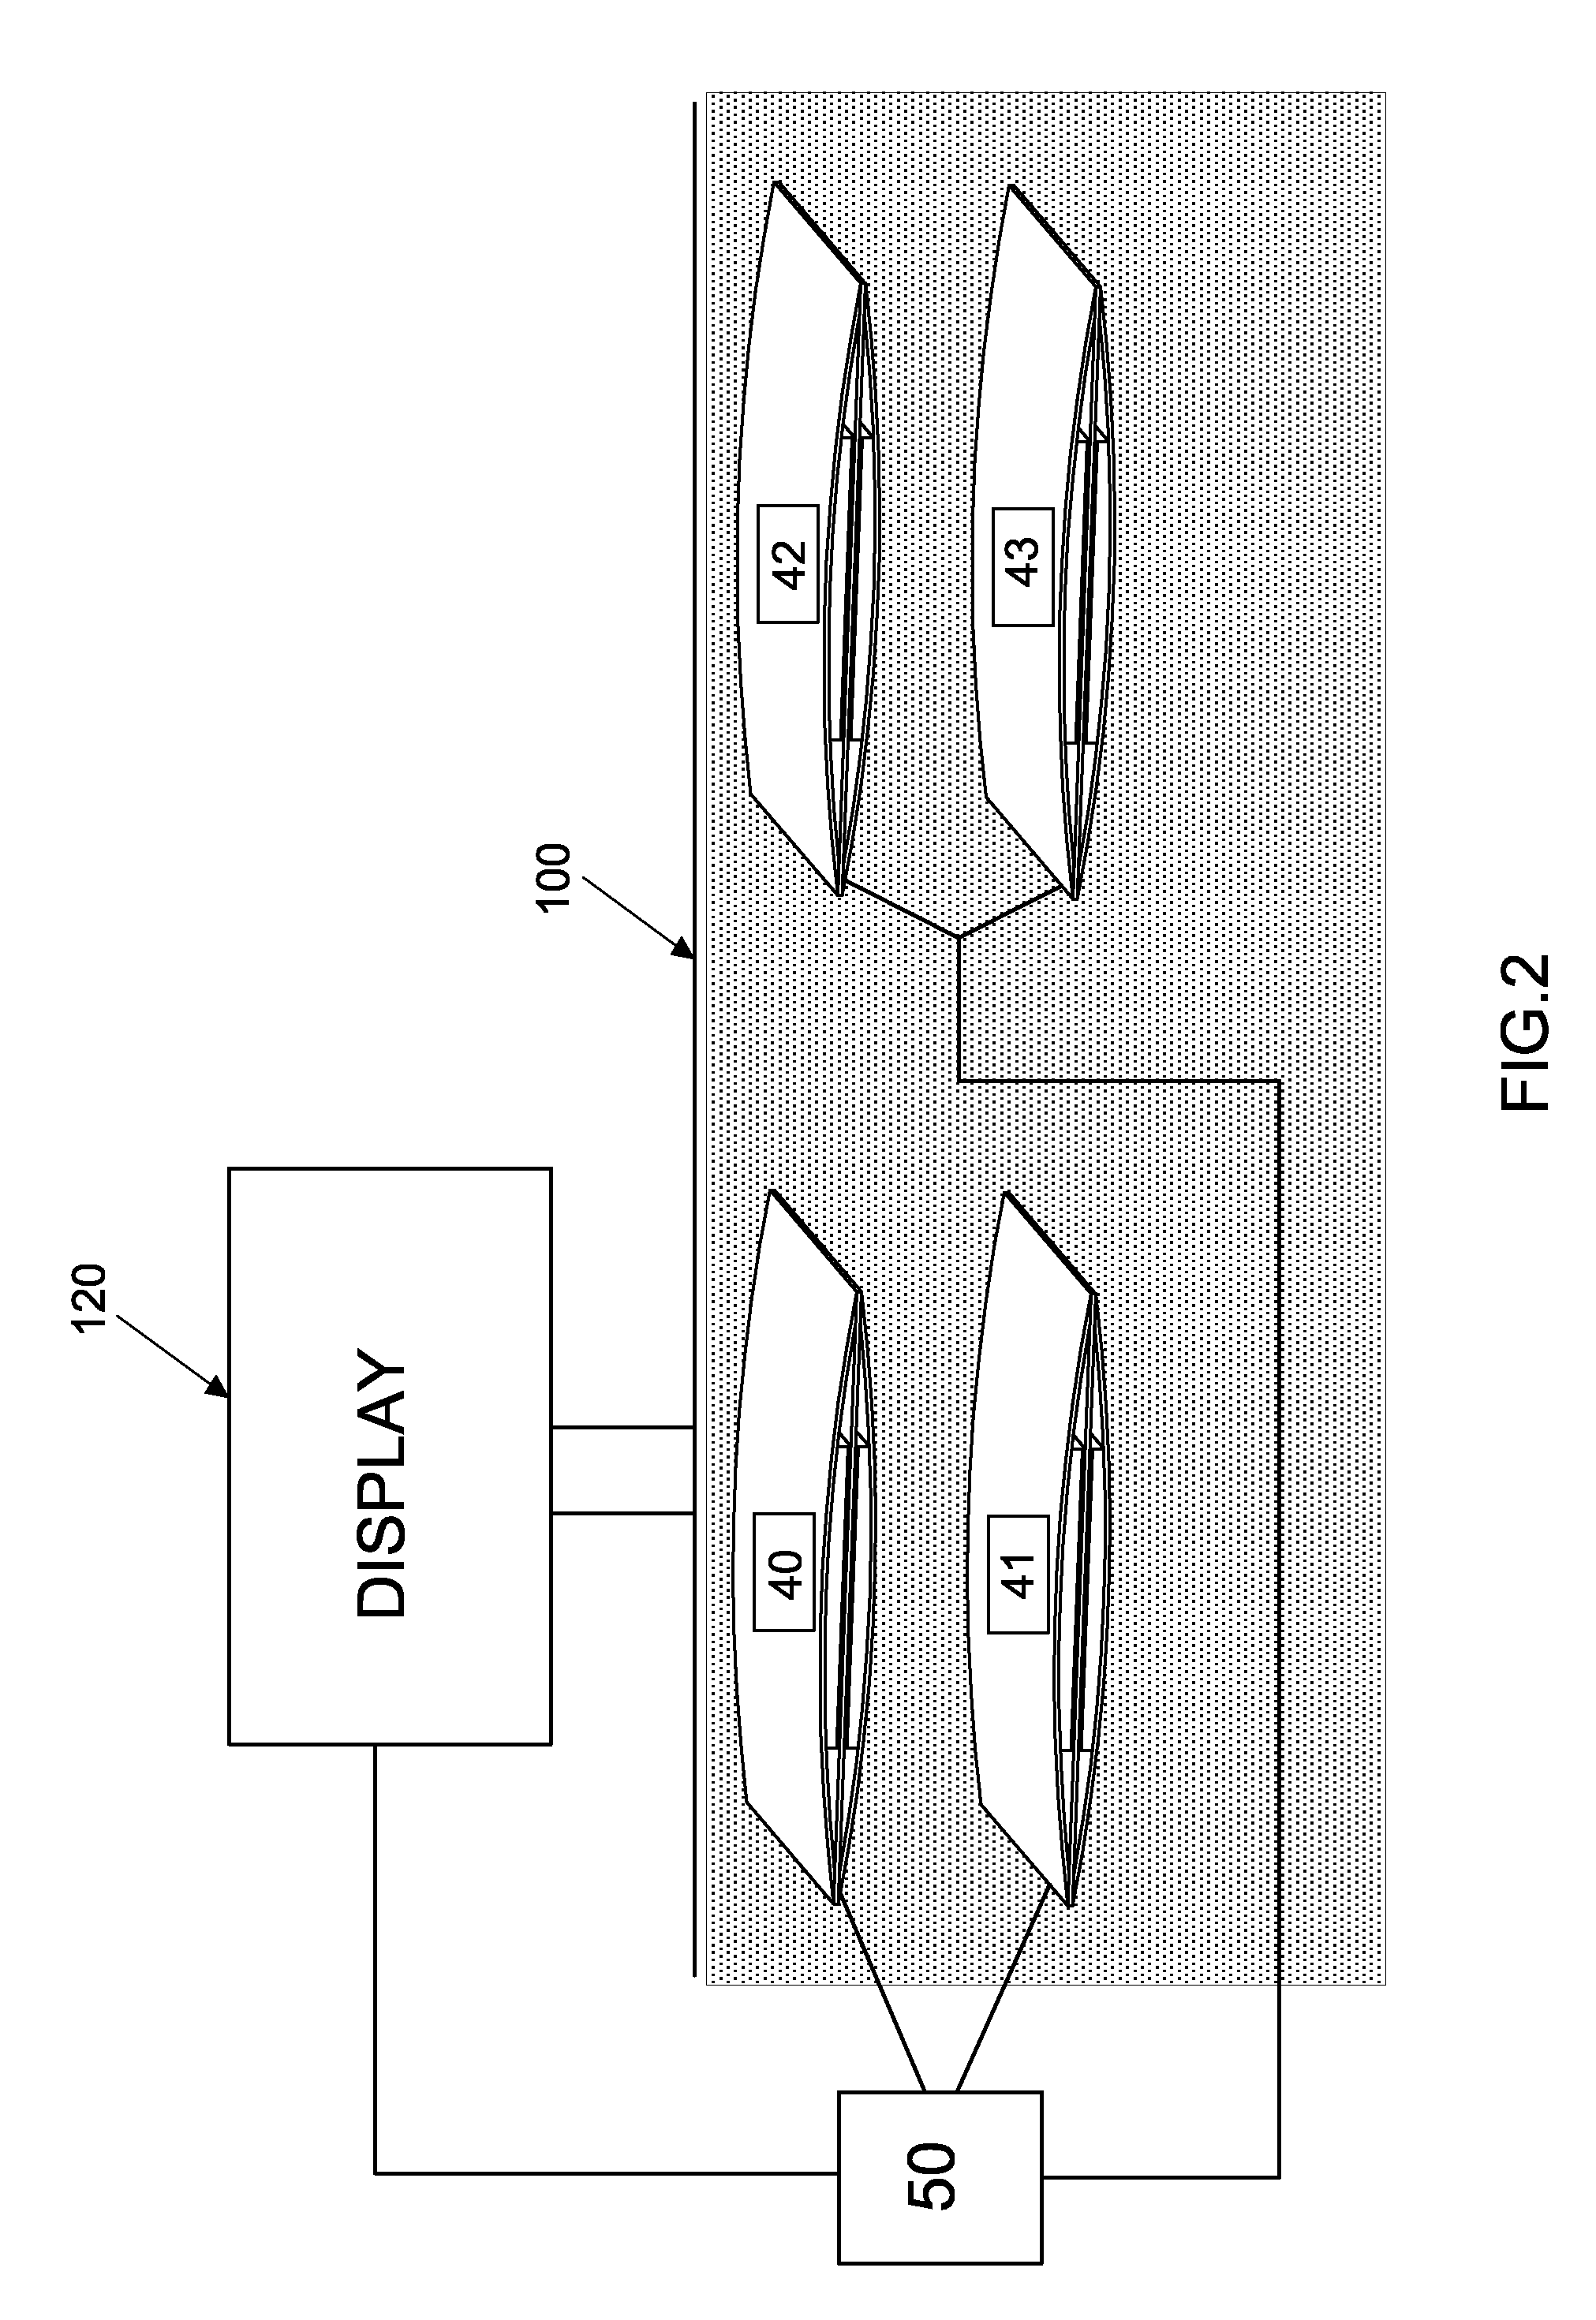 Apparatus and method for generating electricity using piezoelectric material